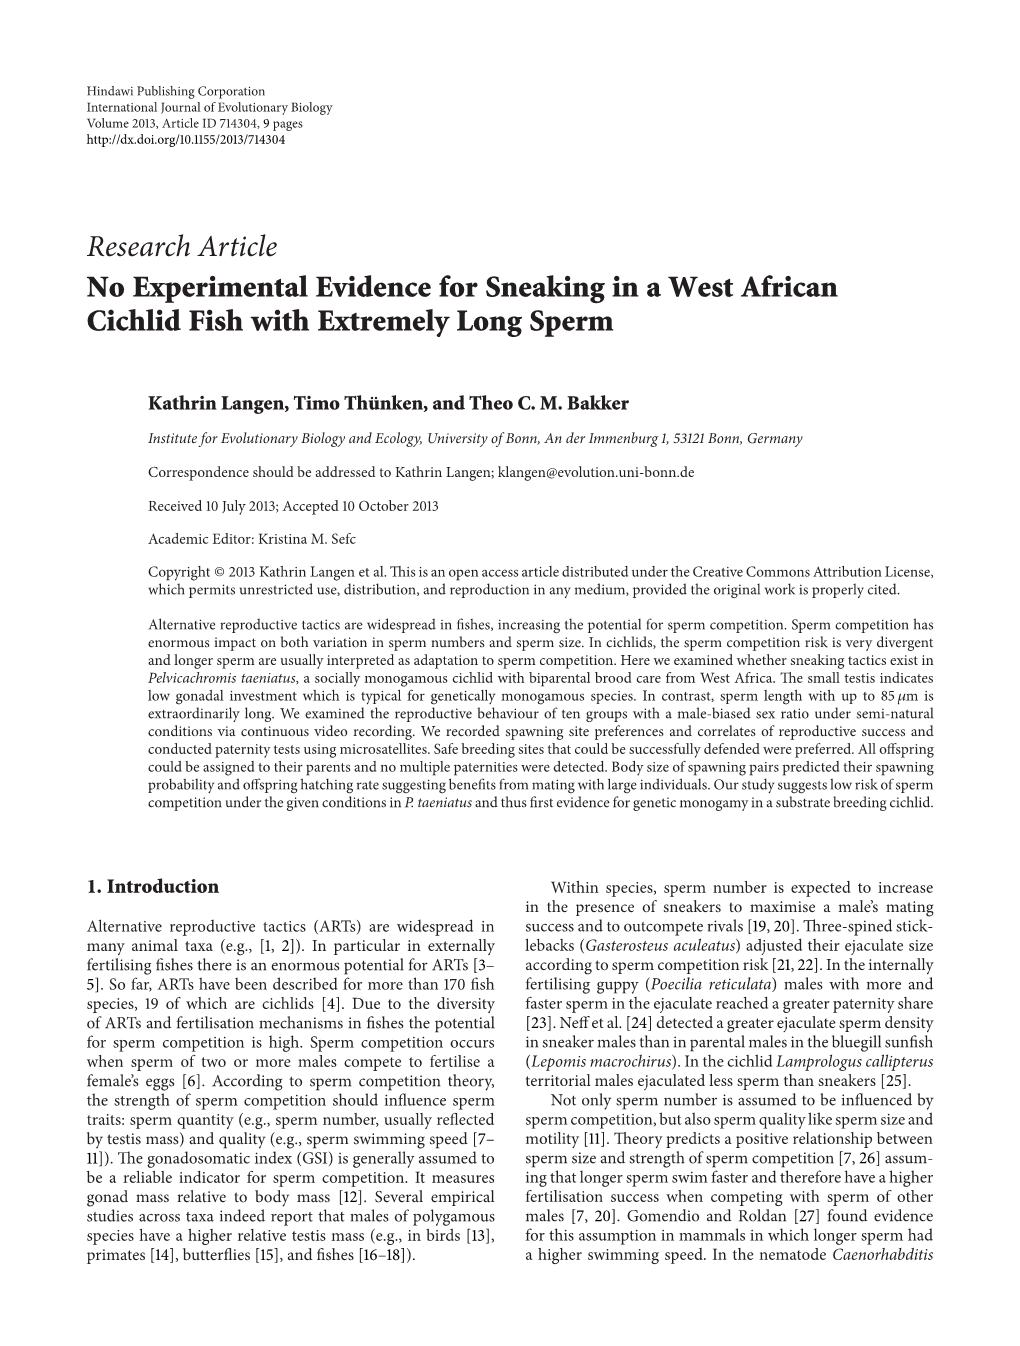 No Experimental Evidence for Sneaking in a West African Cichlid Fish with Extremely Long Sperm